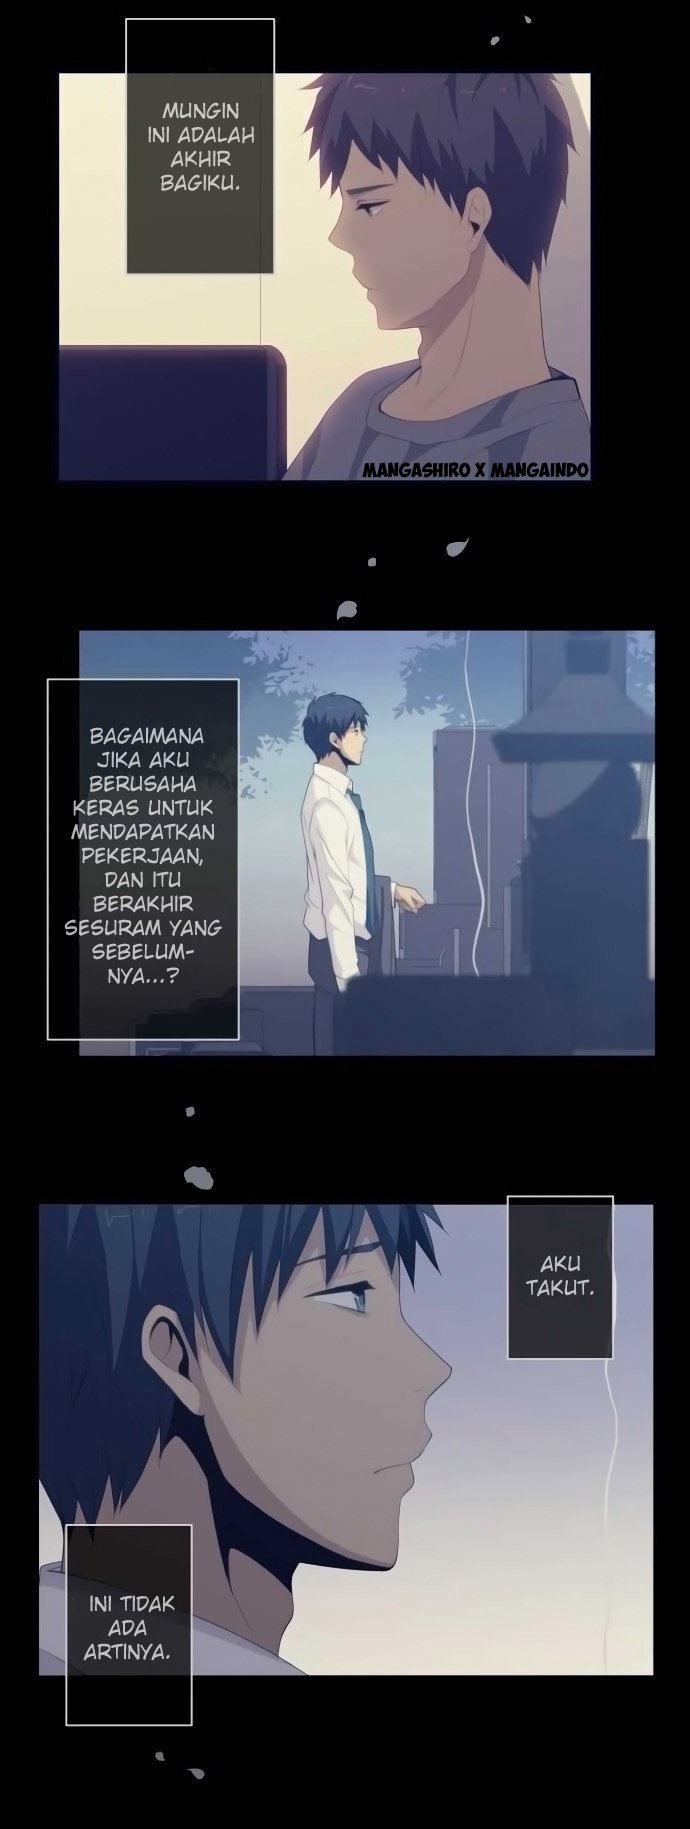 ReLife Chapter 154